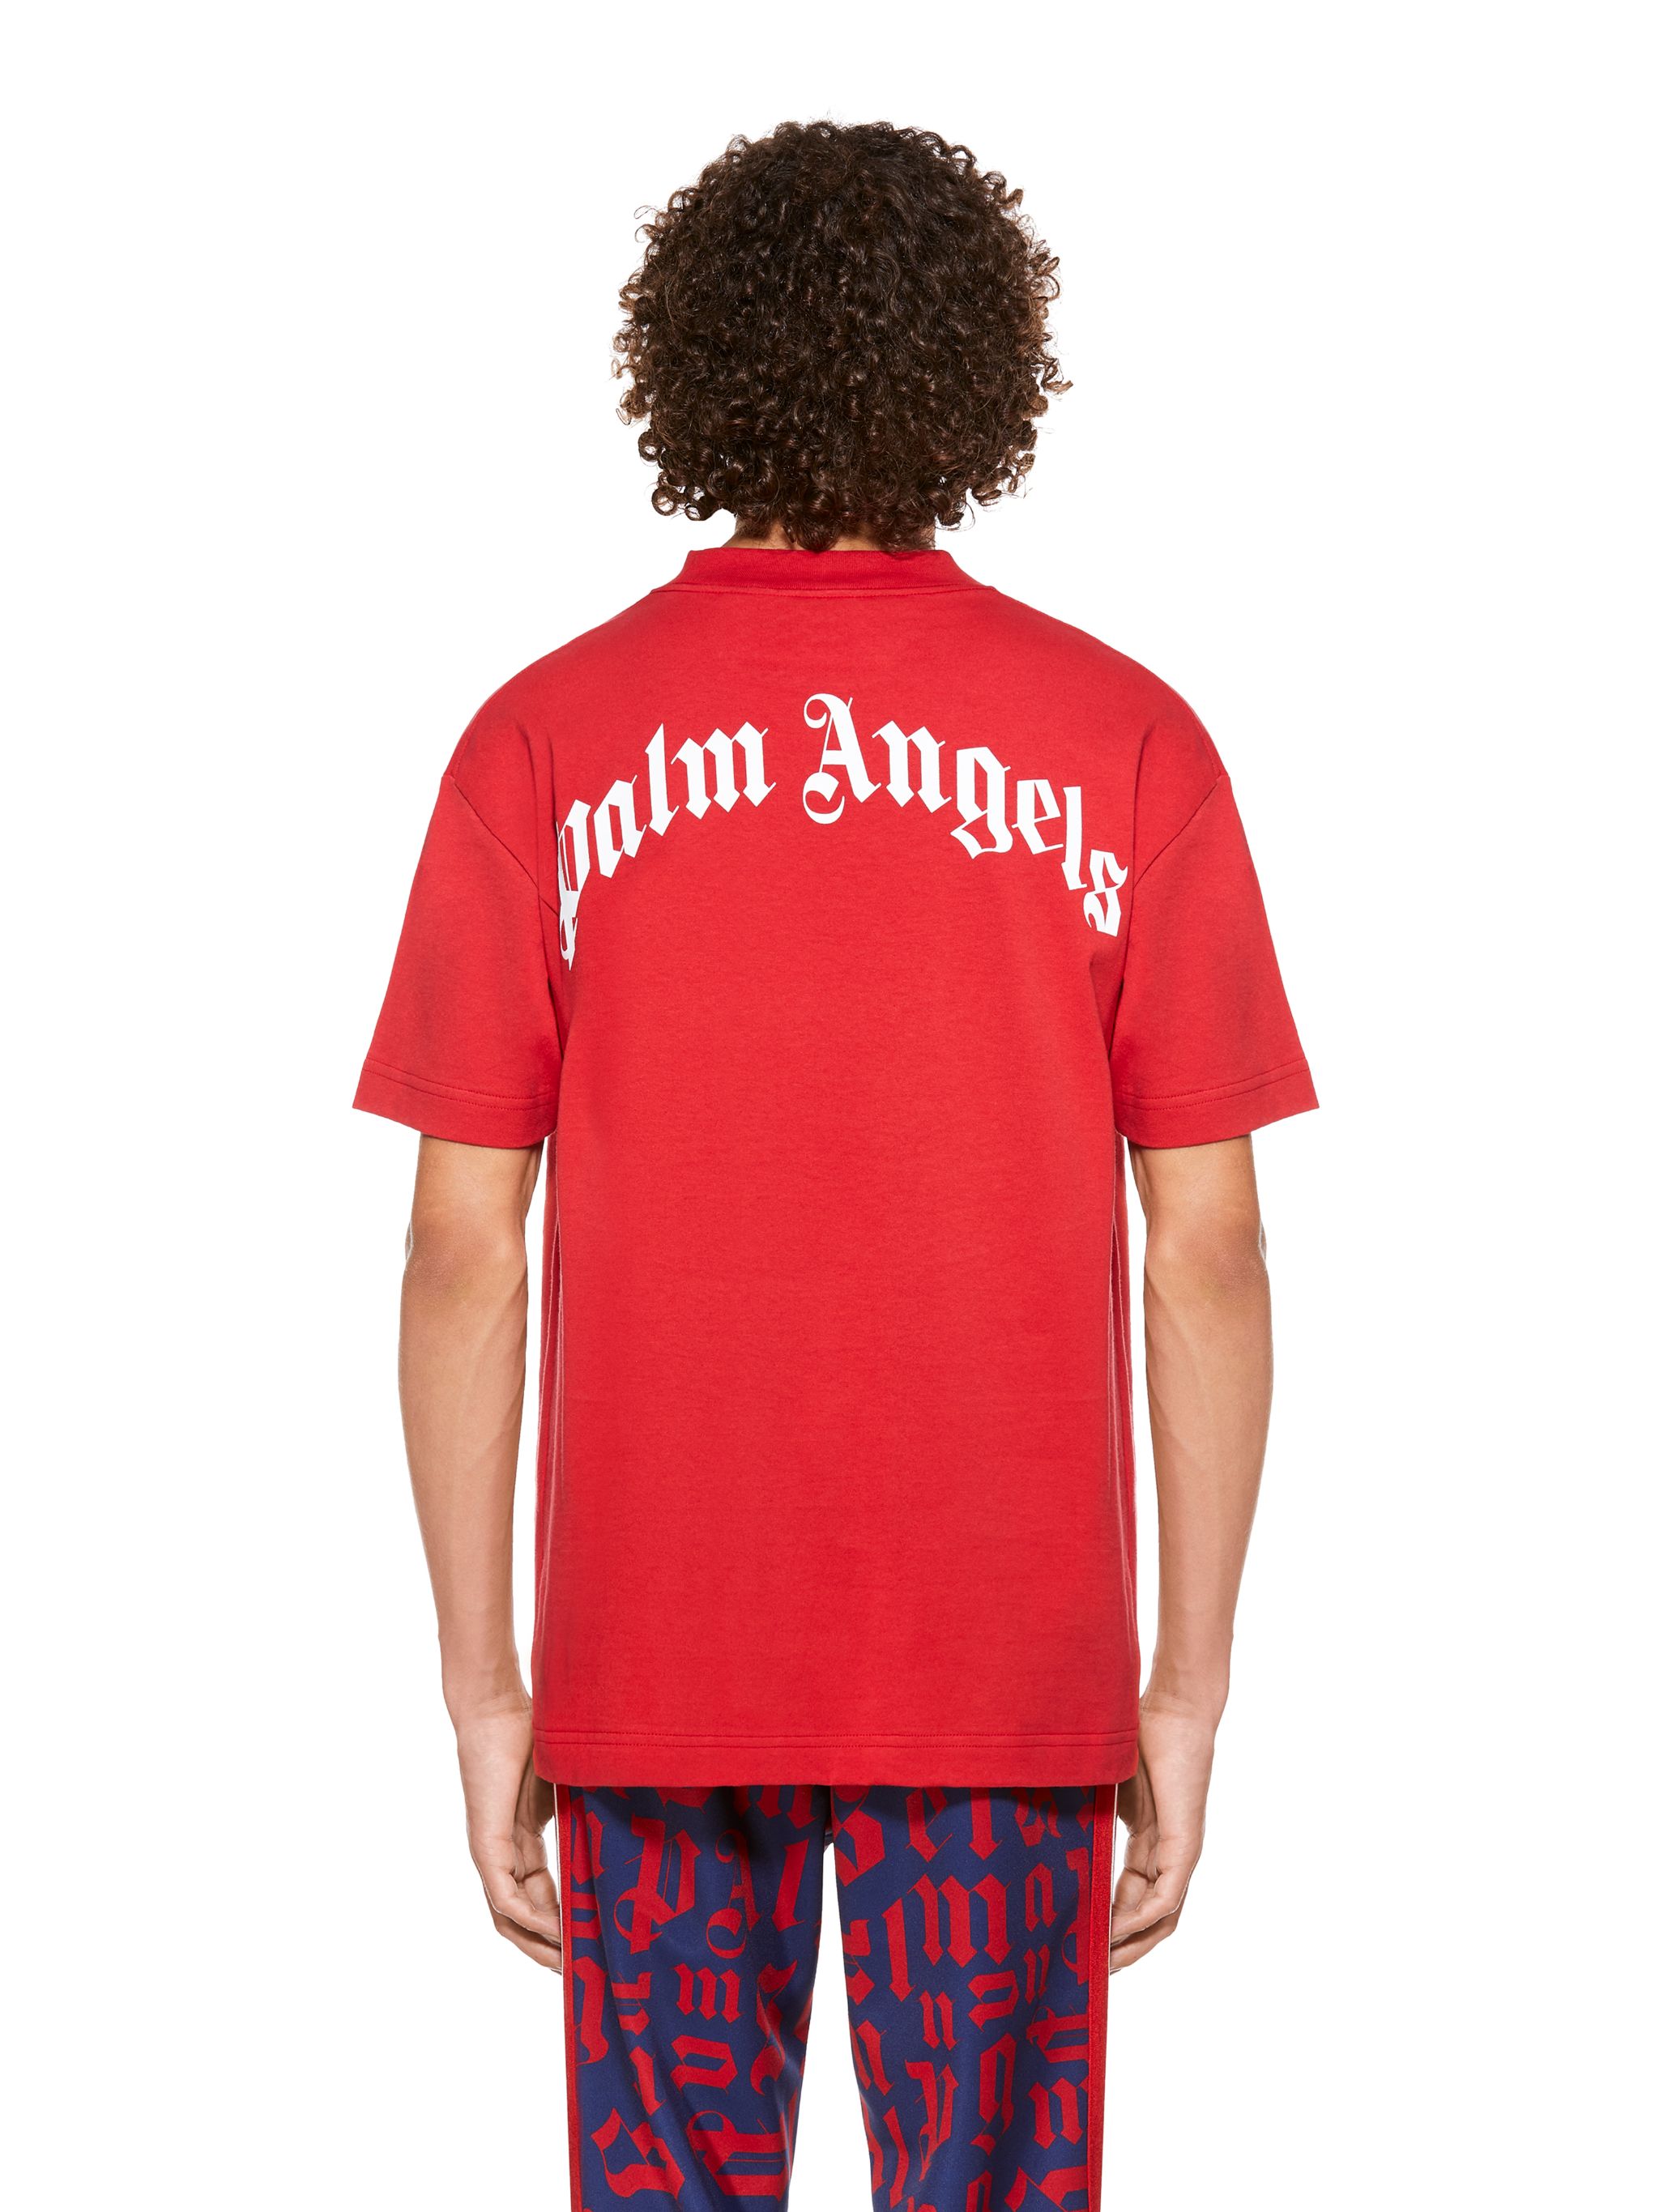 ICE BEAR S/S T-SHIRT in red - Palm Angels® Official